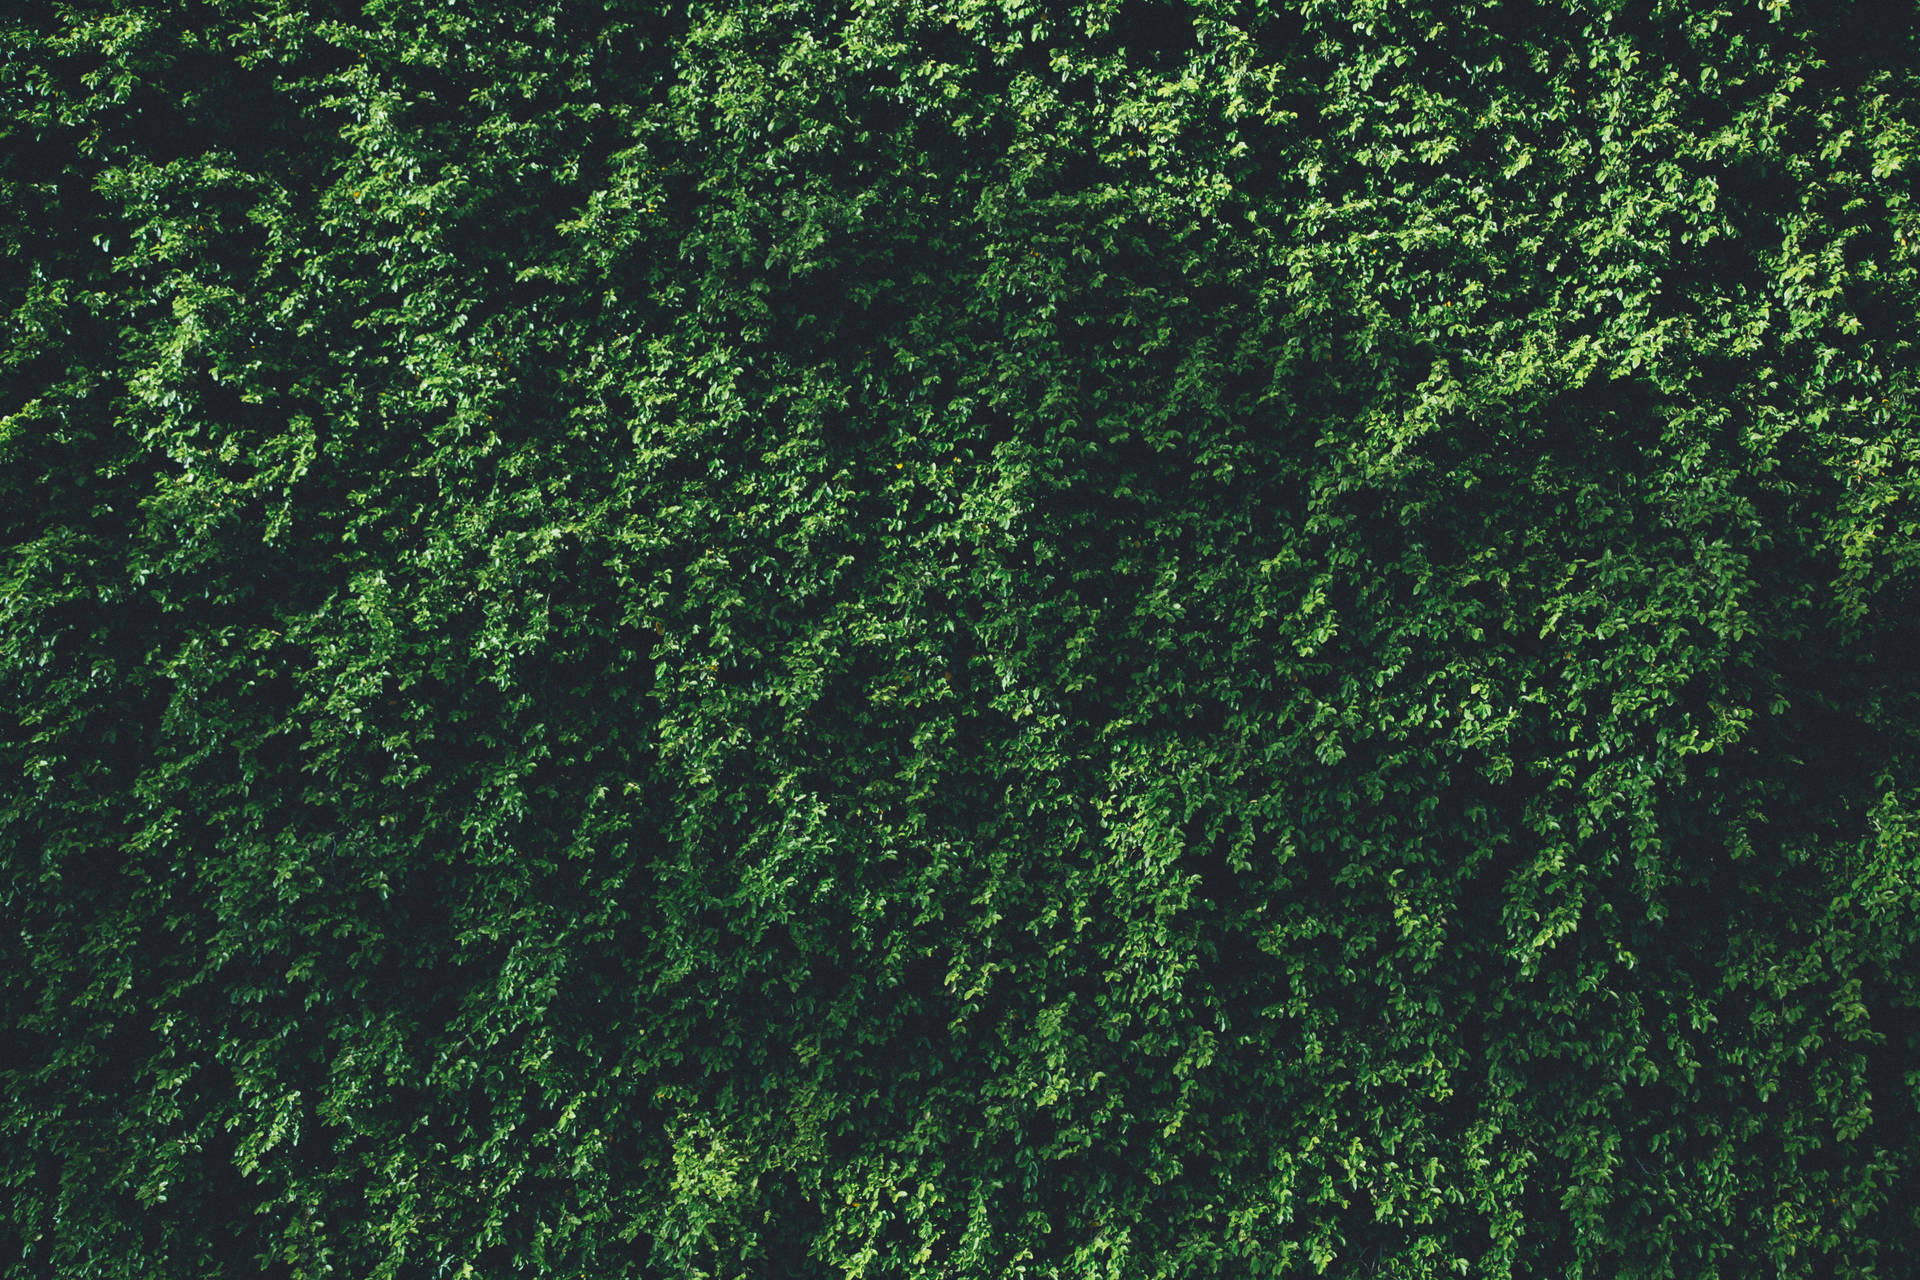 Wall Of Green Leaves Wallpaper